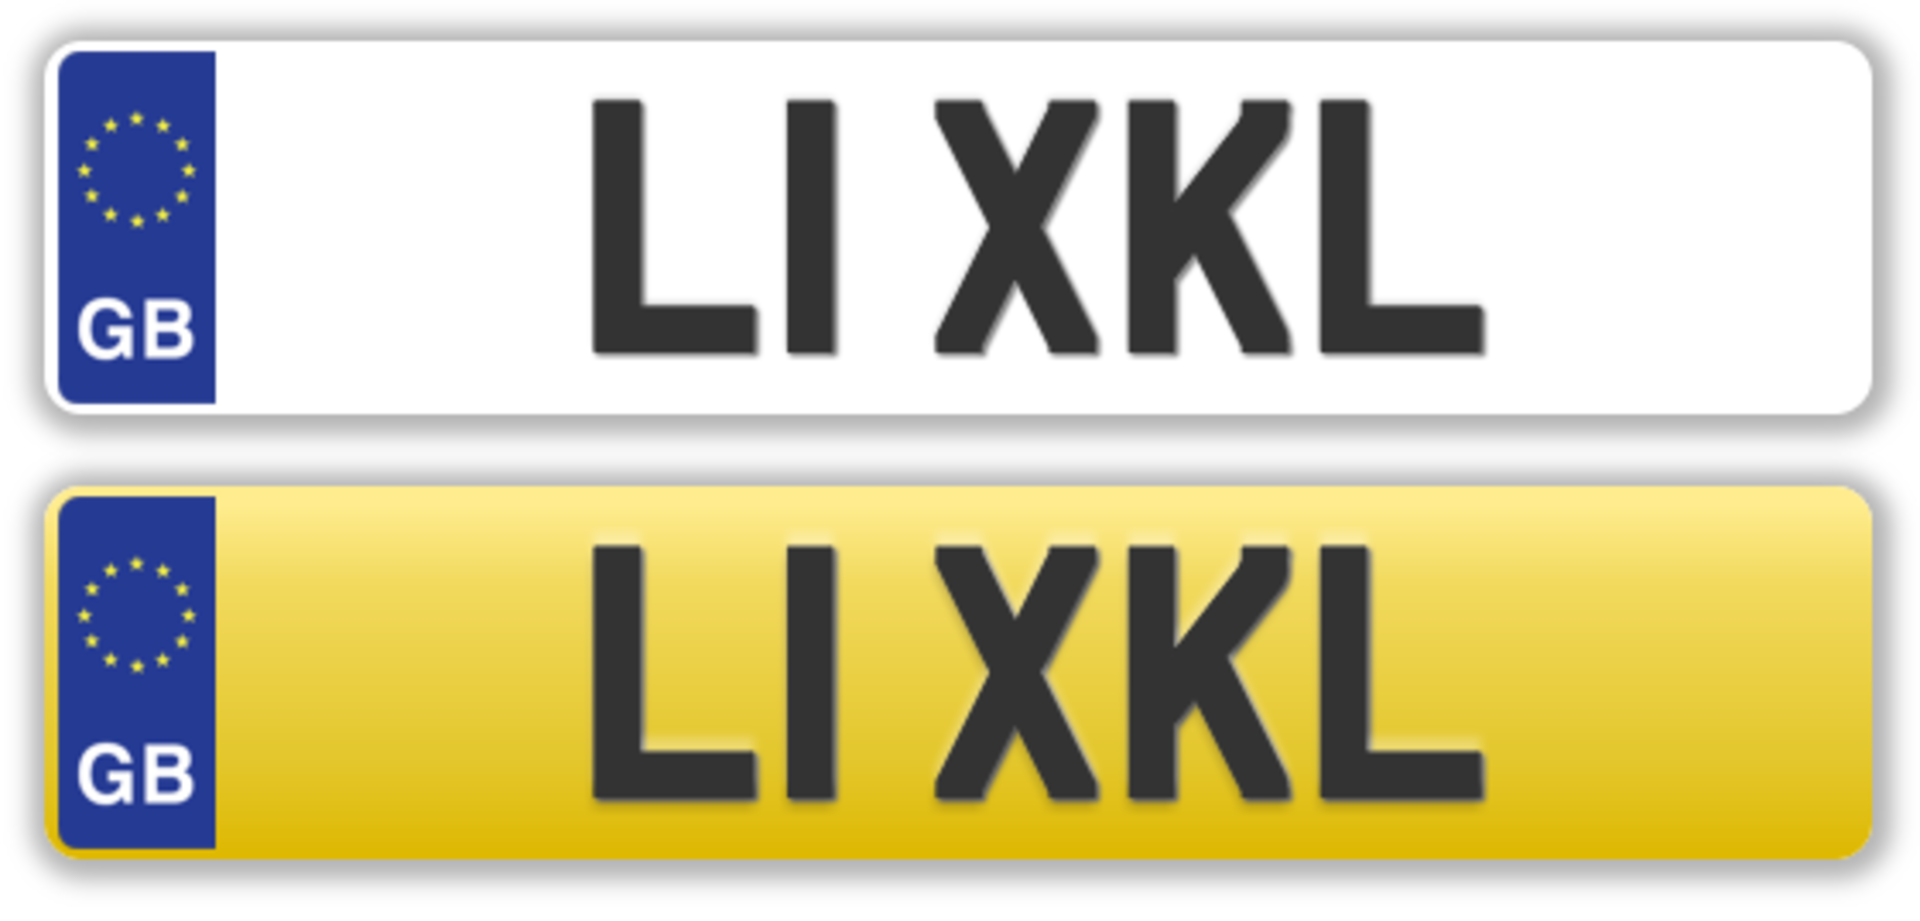 Cherished Plate - L1 XKL - No transfer fees. All registrations on retention and ready to transfer.